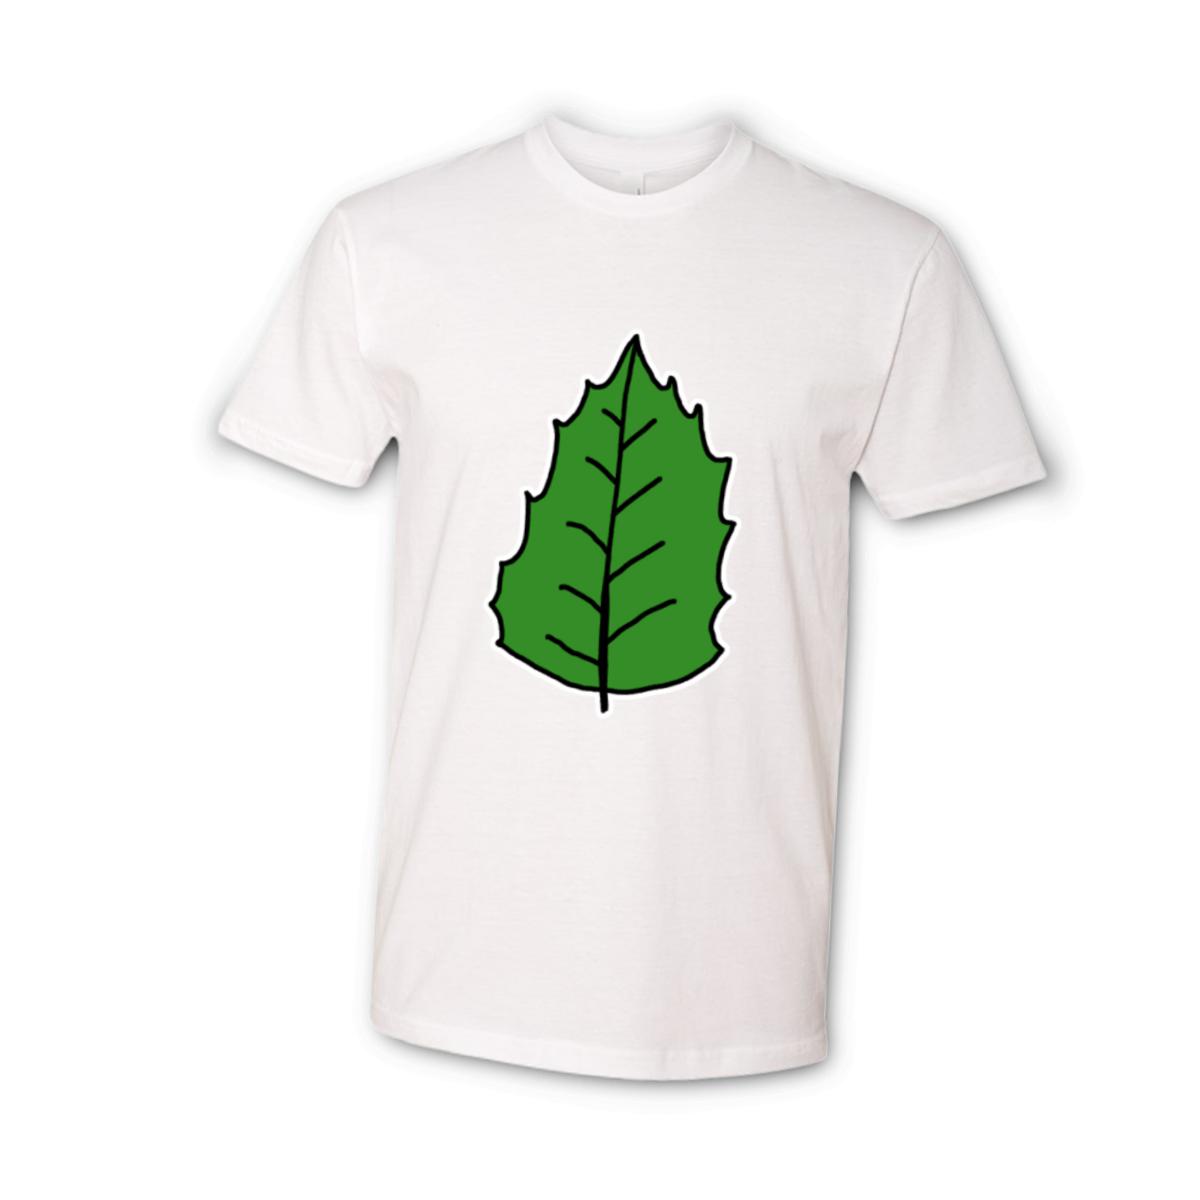 Holly Leaf Unisex Tee Small white